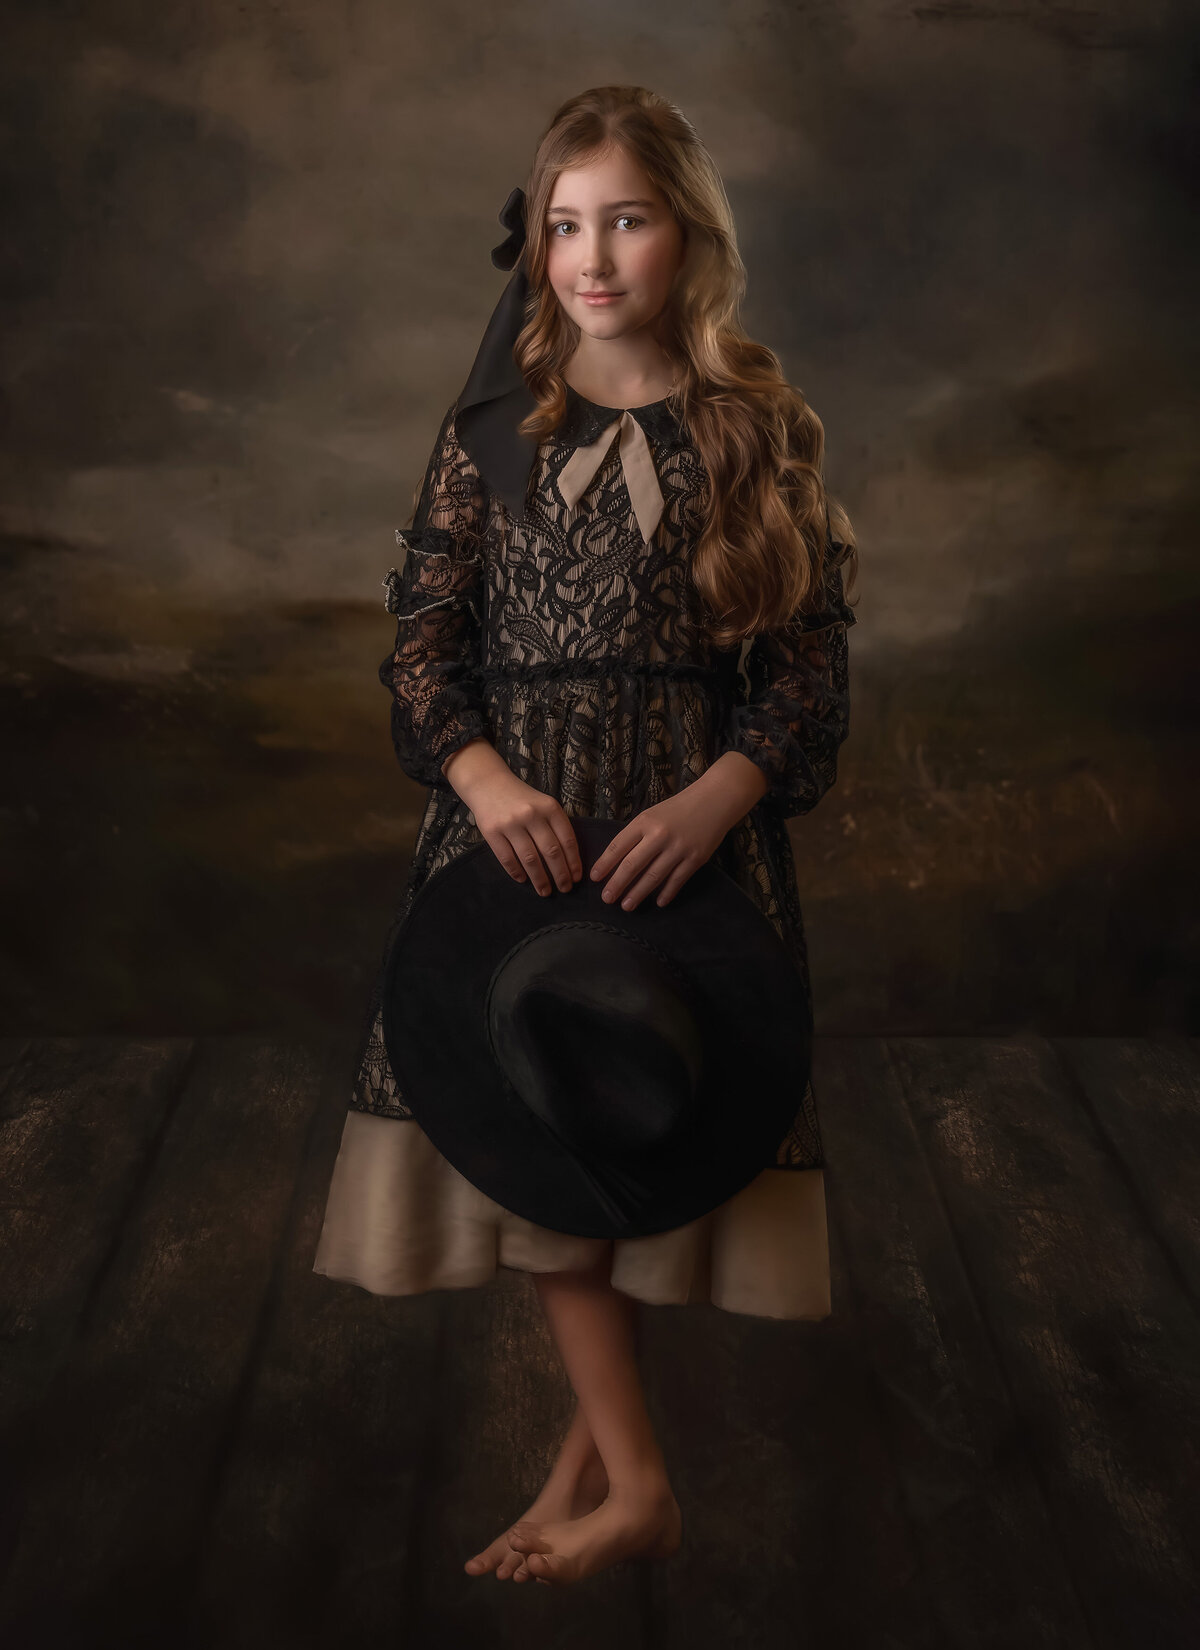 Girl-in-vintage-dress-and-hat